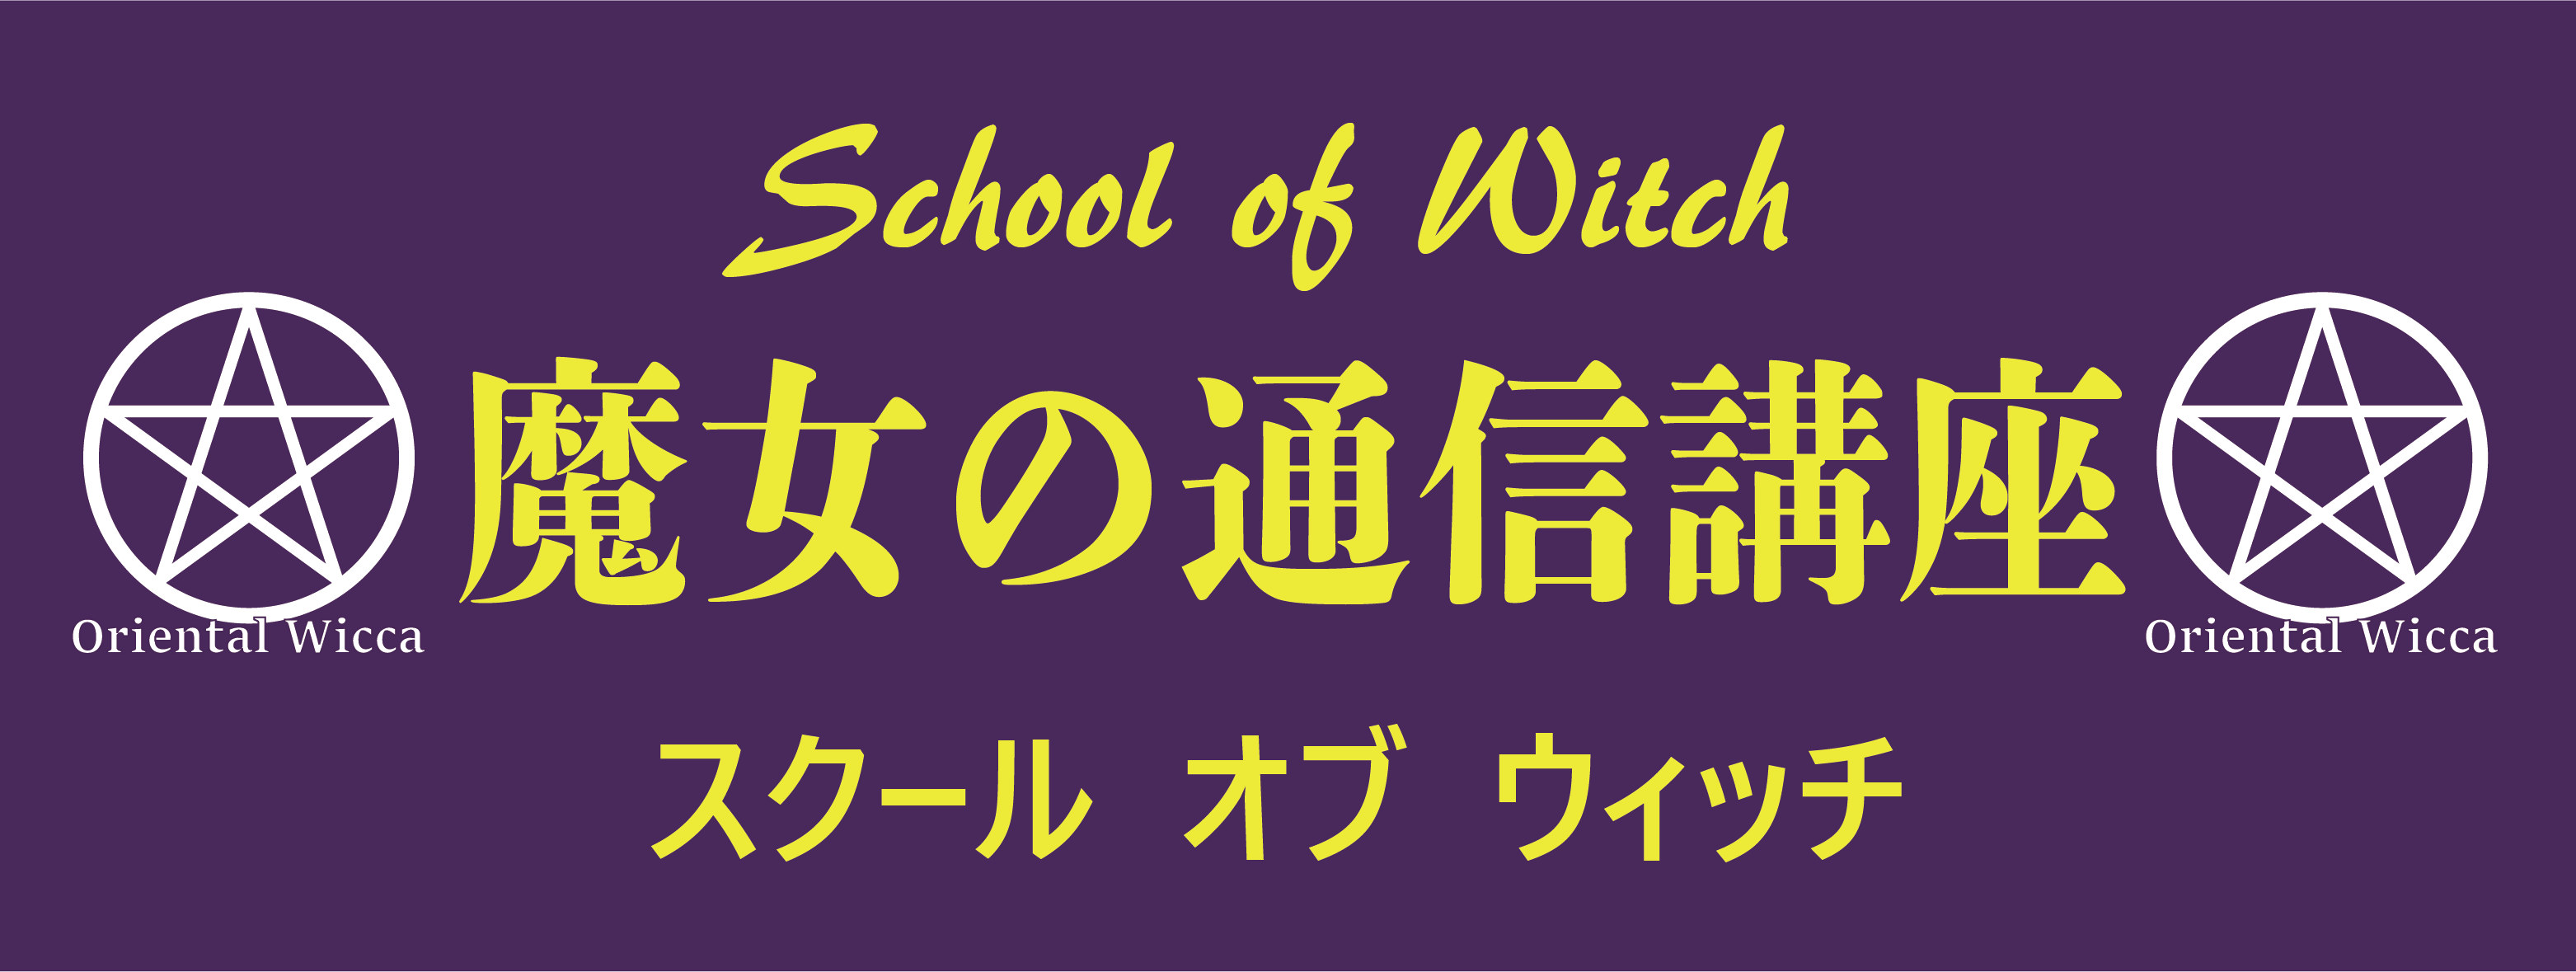 School of Witch